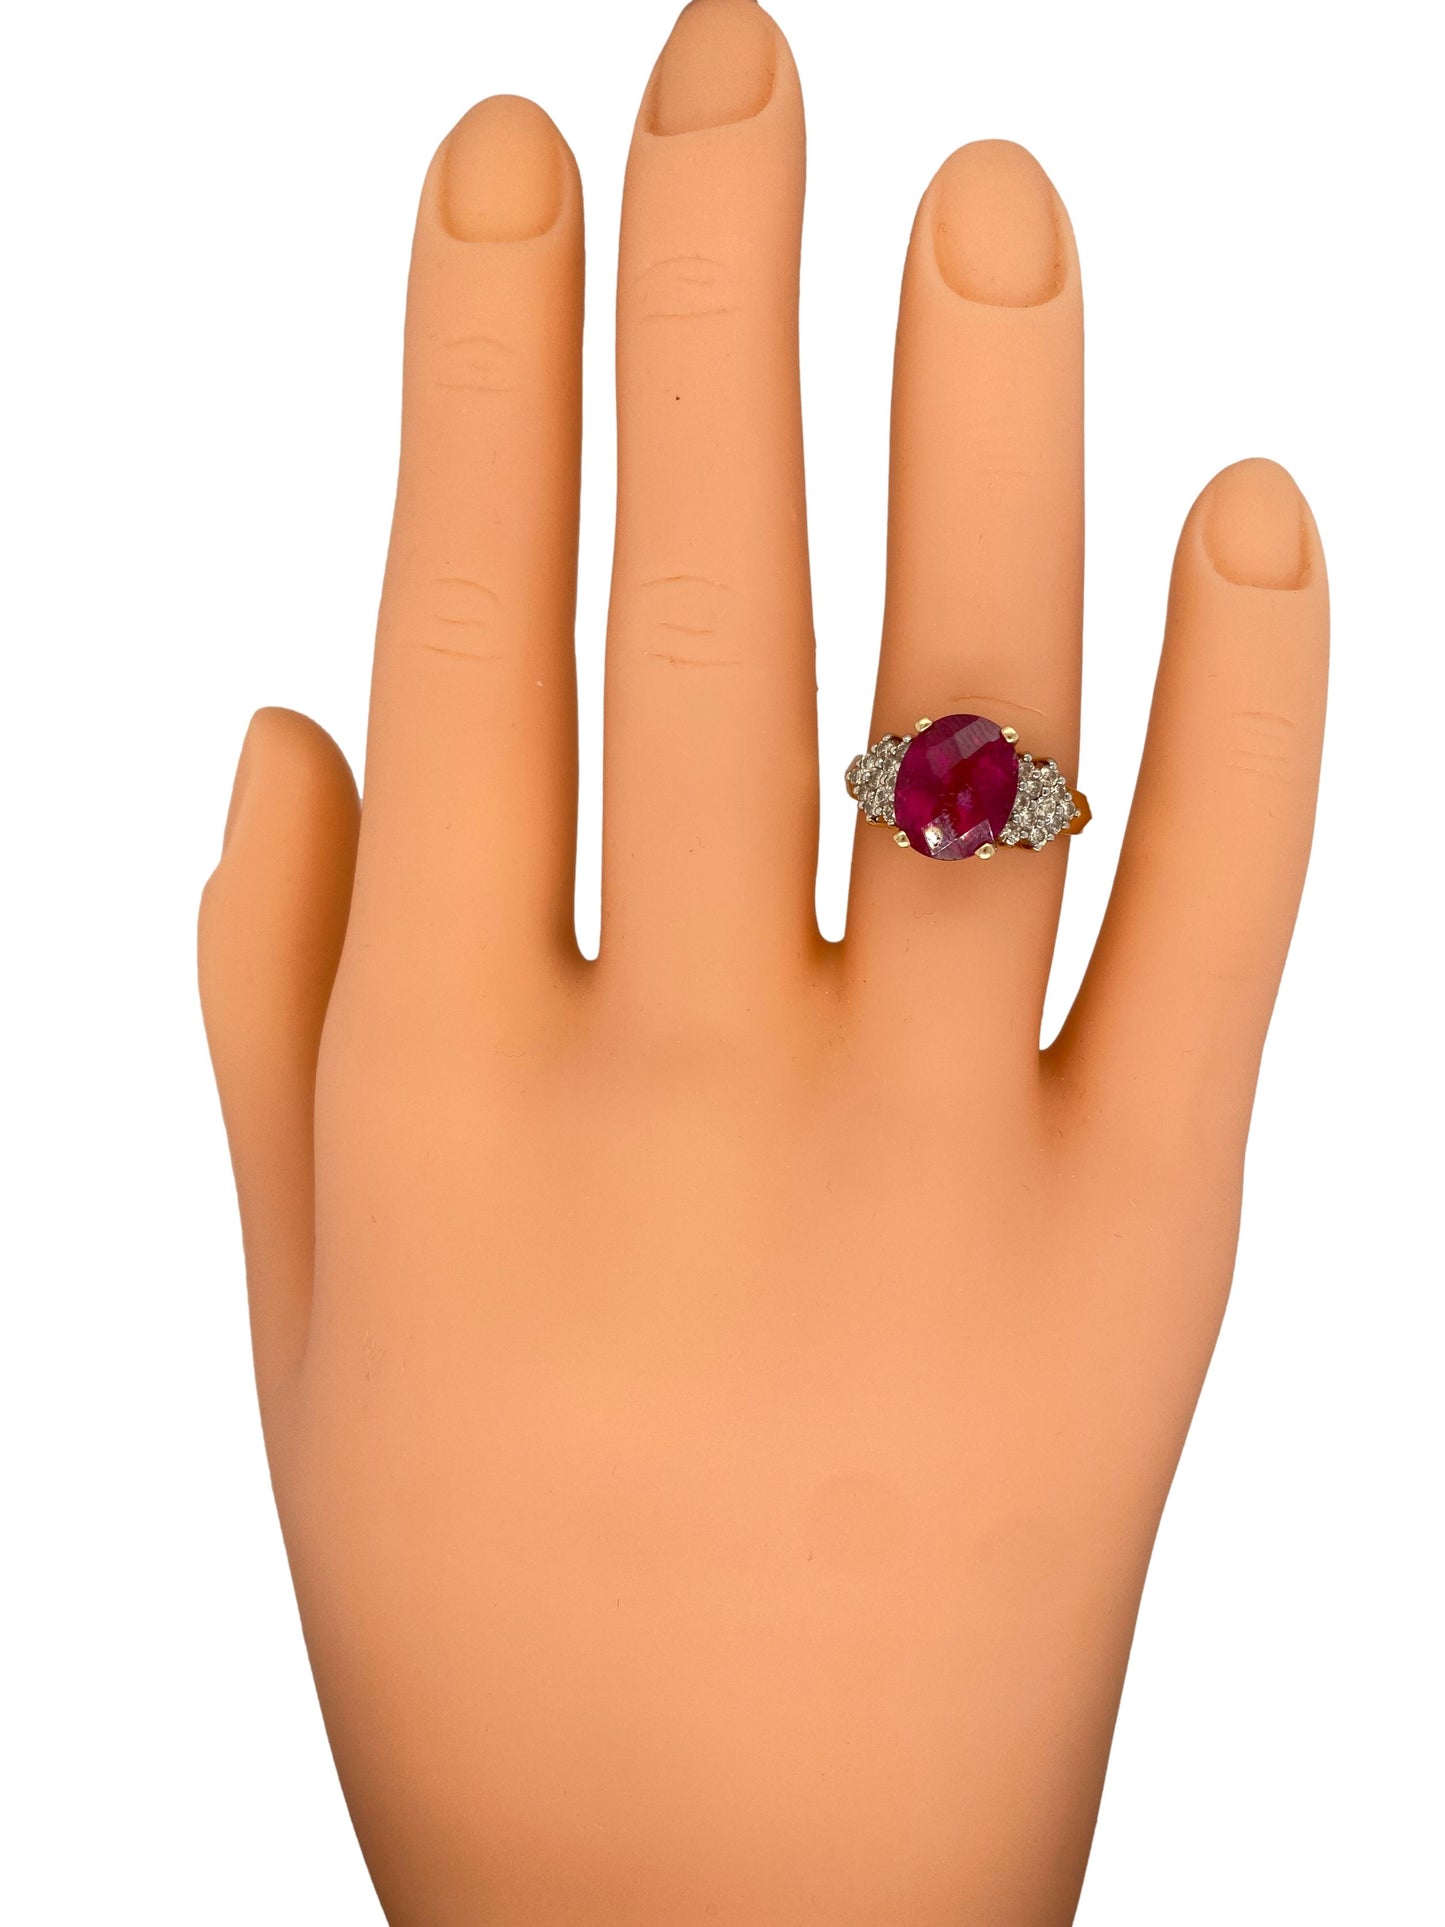 Circa 2000s Oval Pink Tourmaline and Diamond Cocktail Ring in 14k Gold